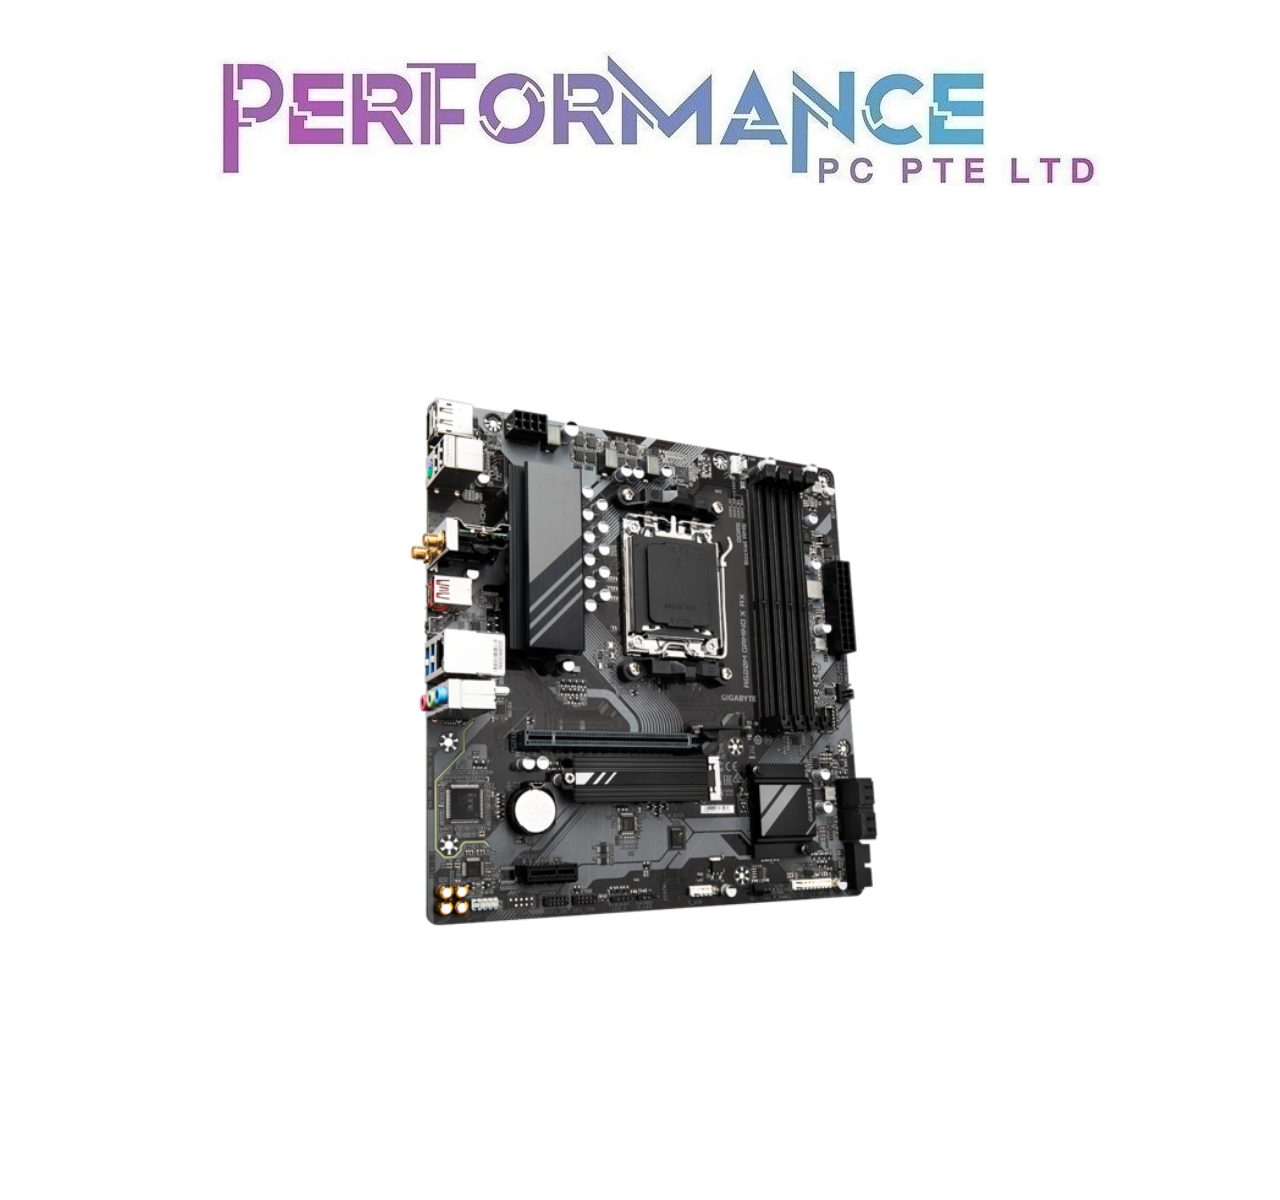 GIGABYTE A620M GAMING X AX Socket 3 M key type 2580 PCIe 4.0 x4 SSD support 4 x SATA 6Gb/s connectors (2 YEARS WARRANTY BY CDL TRADING PTE LTD)